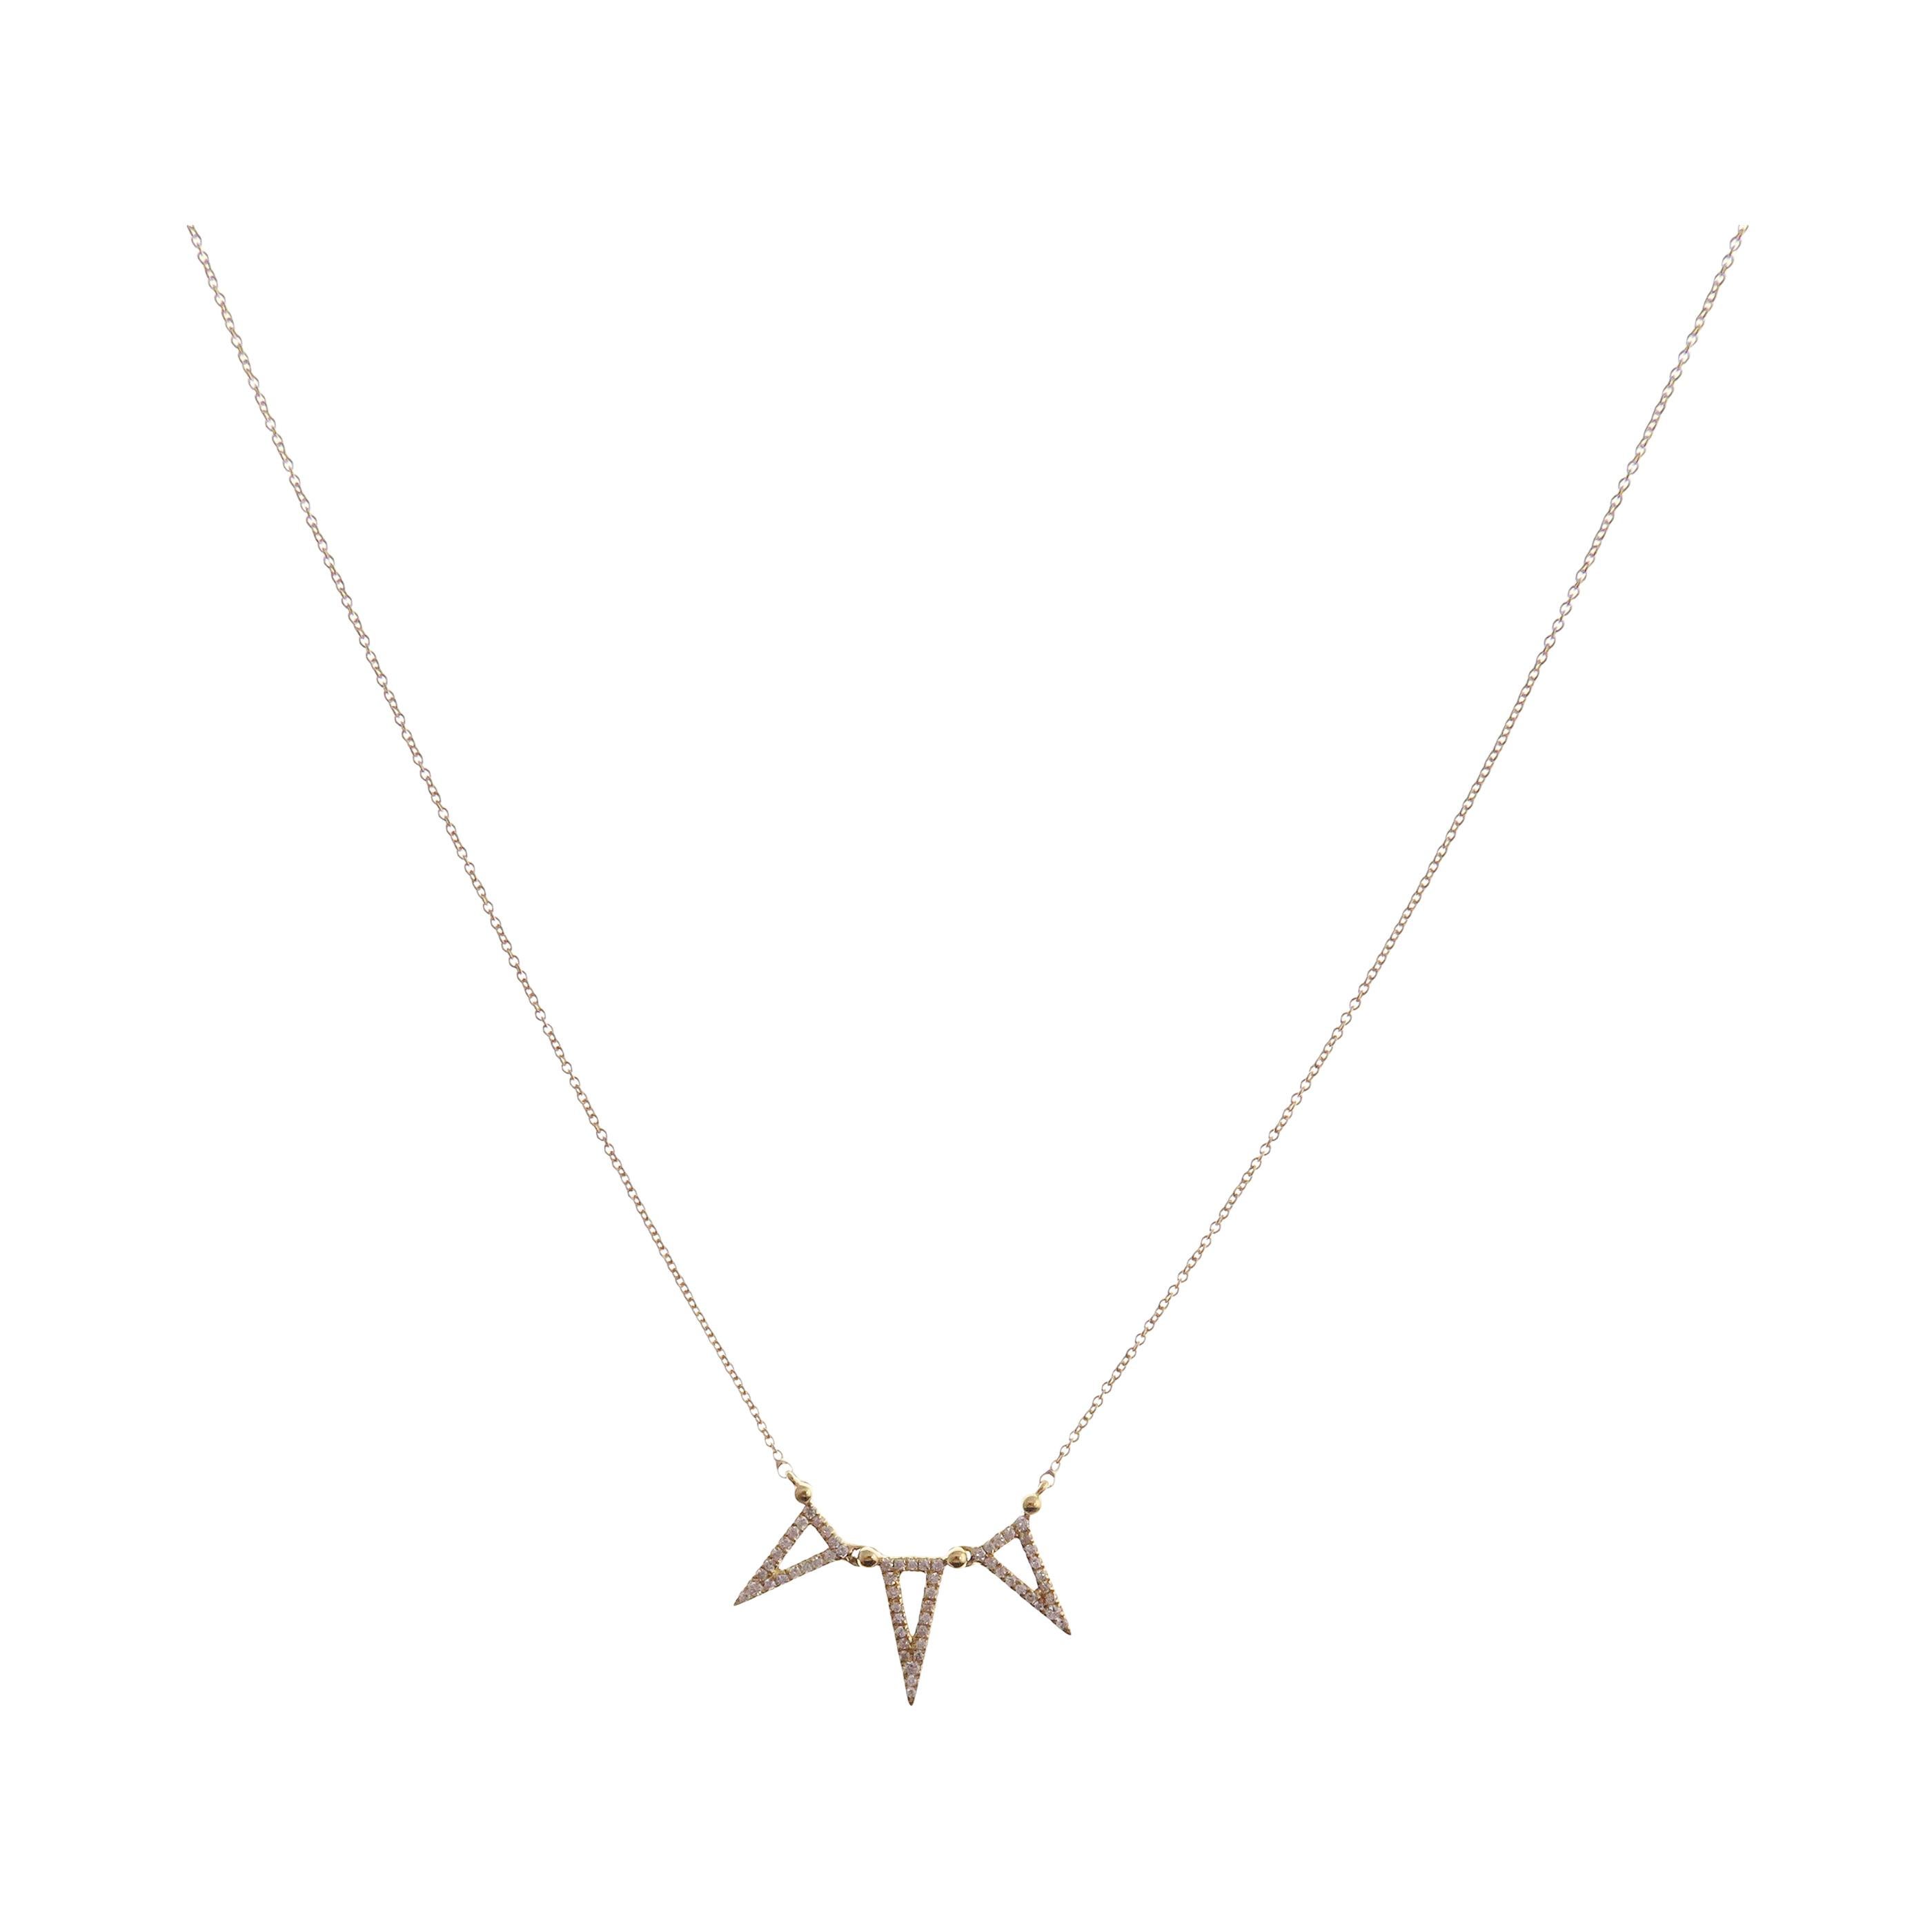 This spikey necklace is crafted in 18-karat yellow gold, weighing approximately 0.15 total carats of SI-H Quality white diamond. 

Necklace is 16